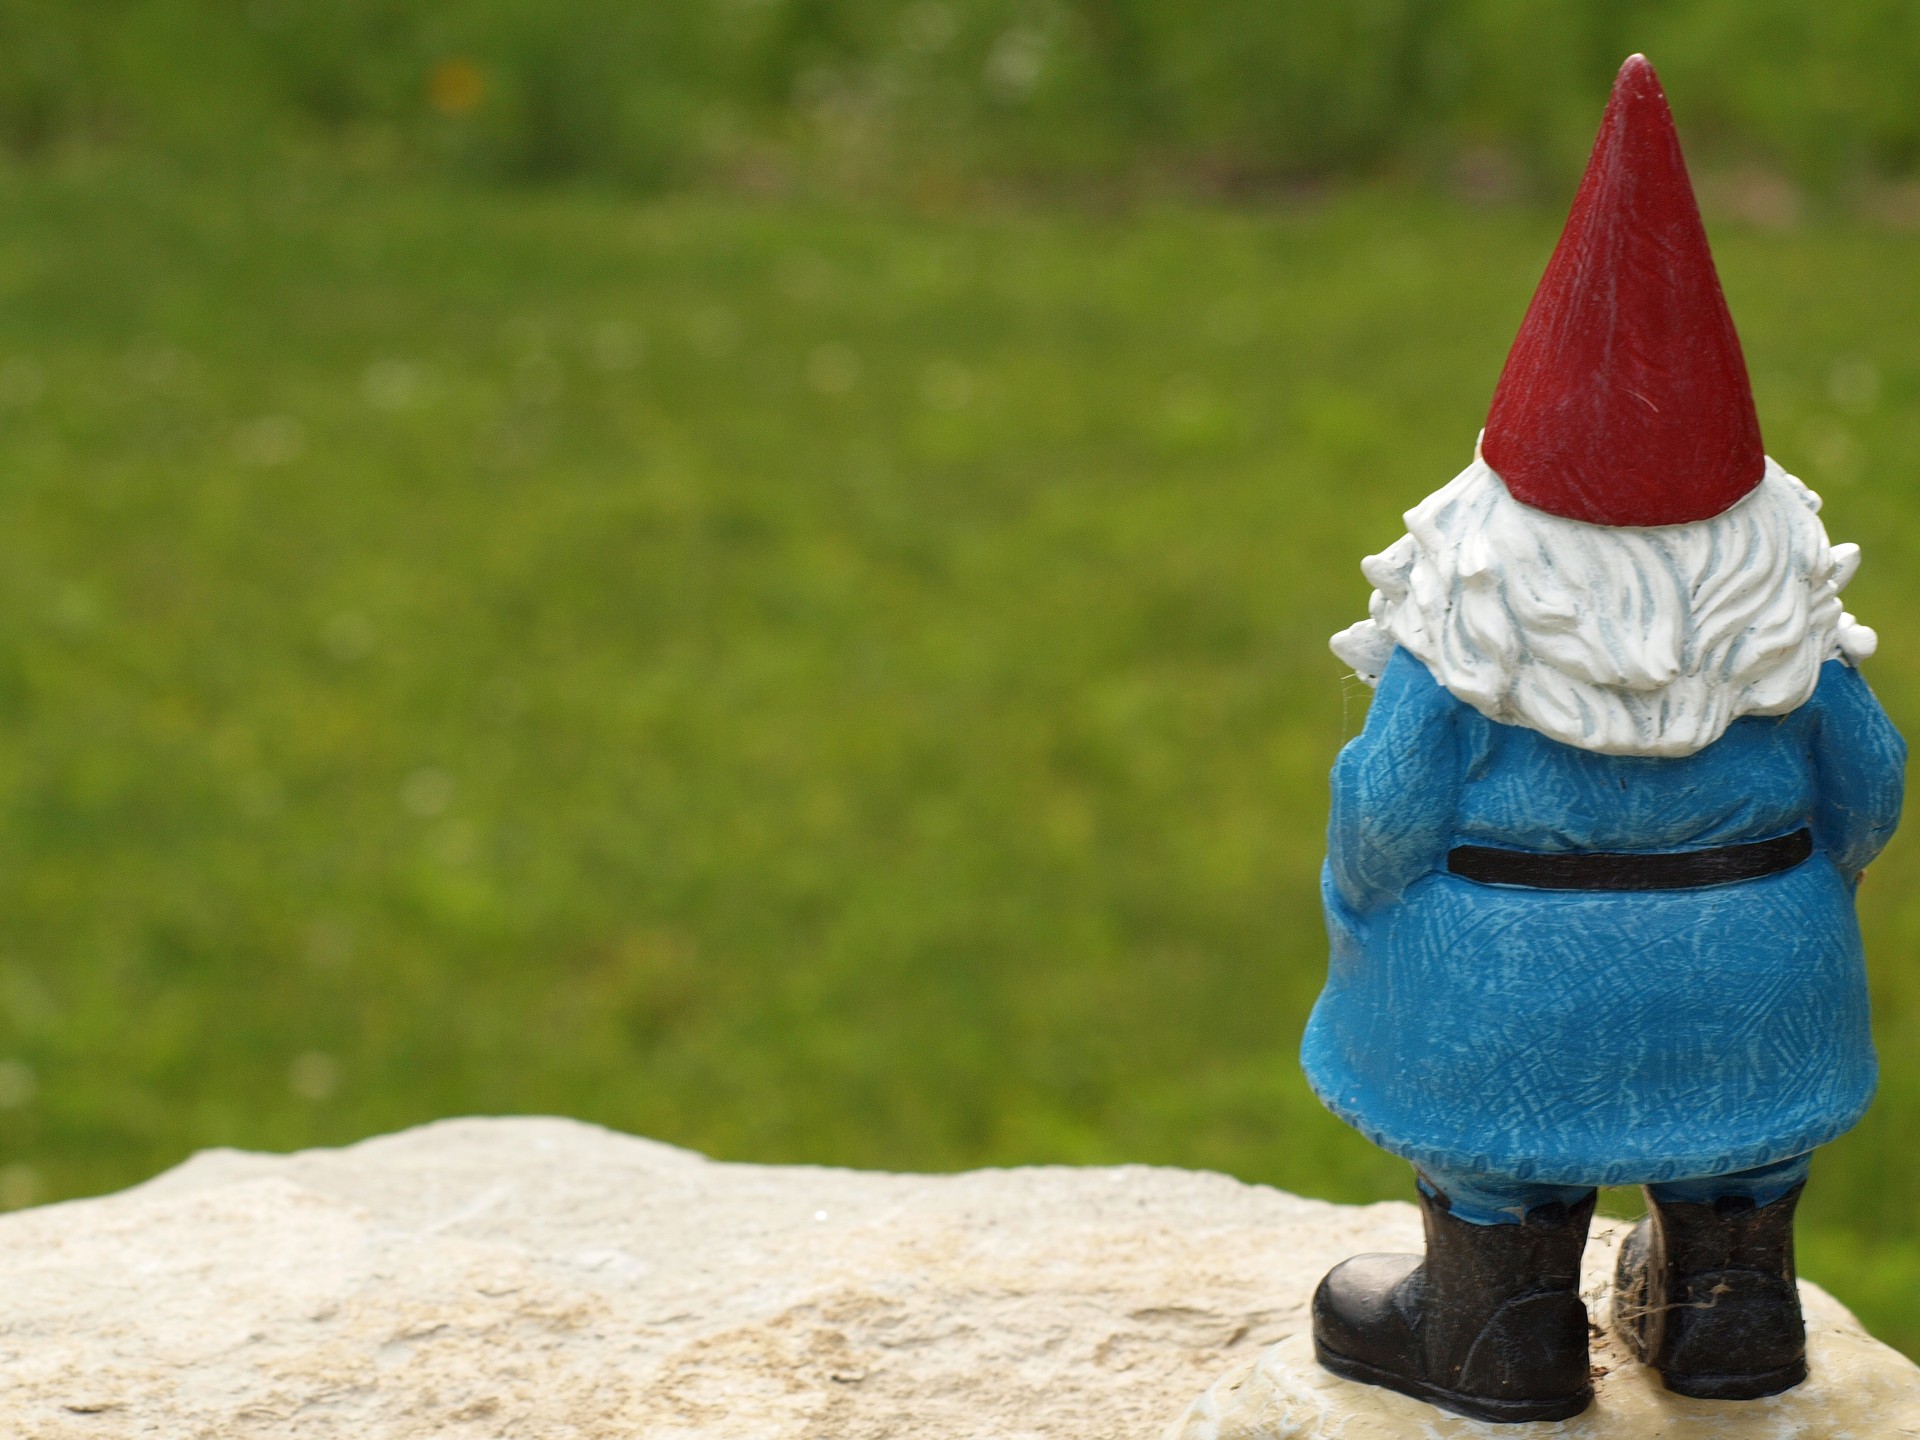 Garden gnome looks out across yard from a rock